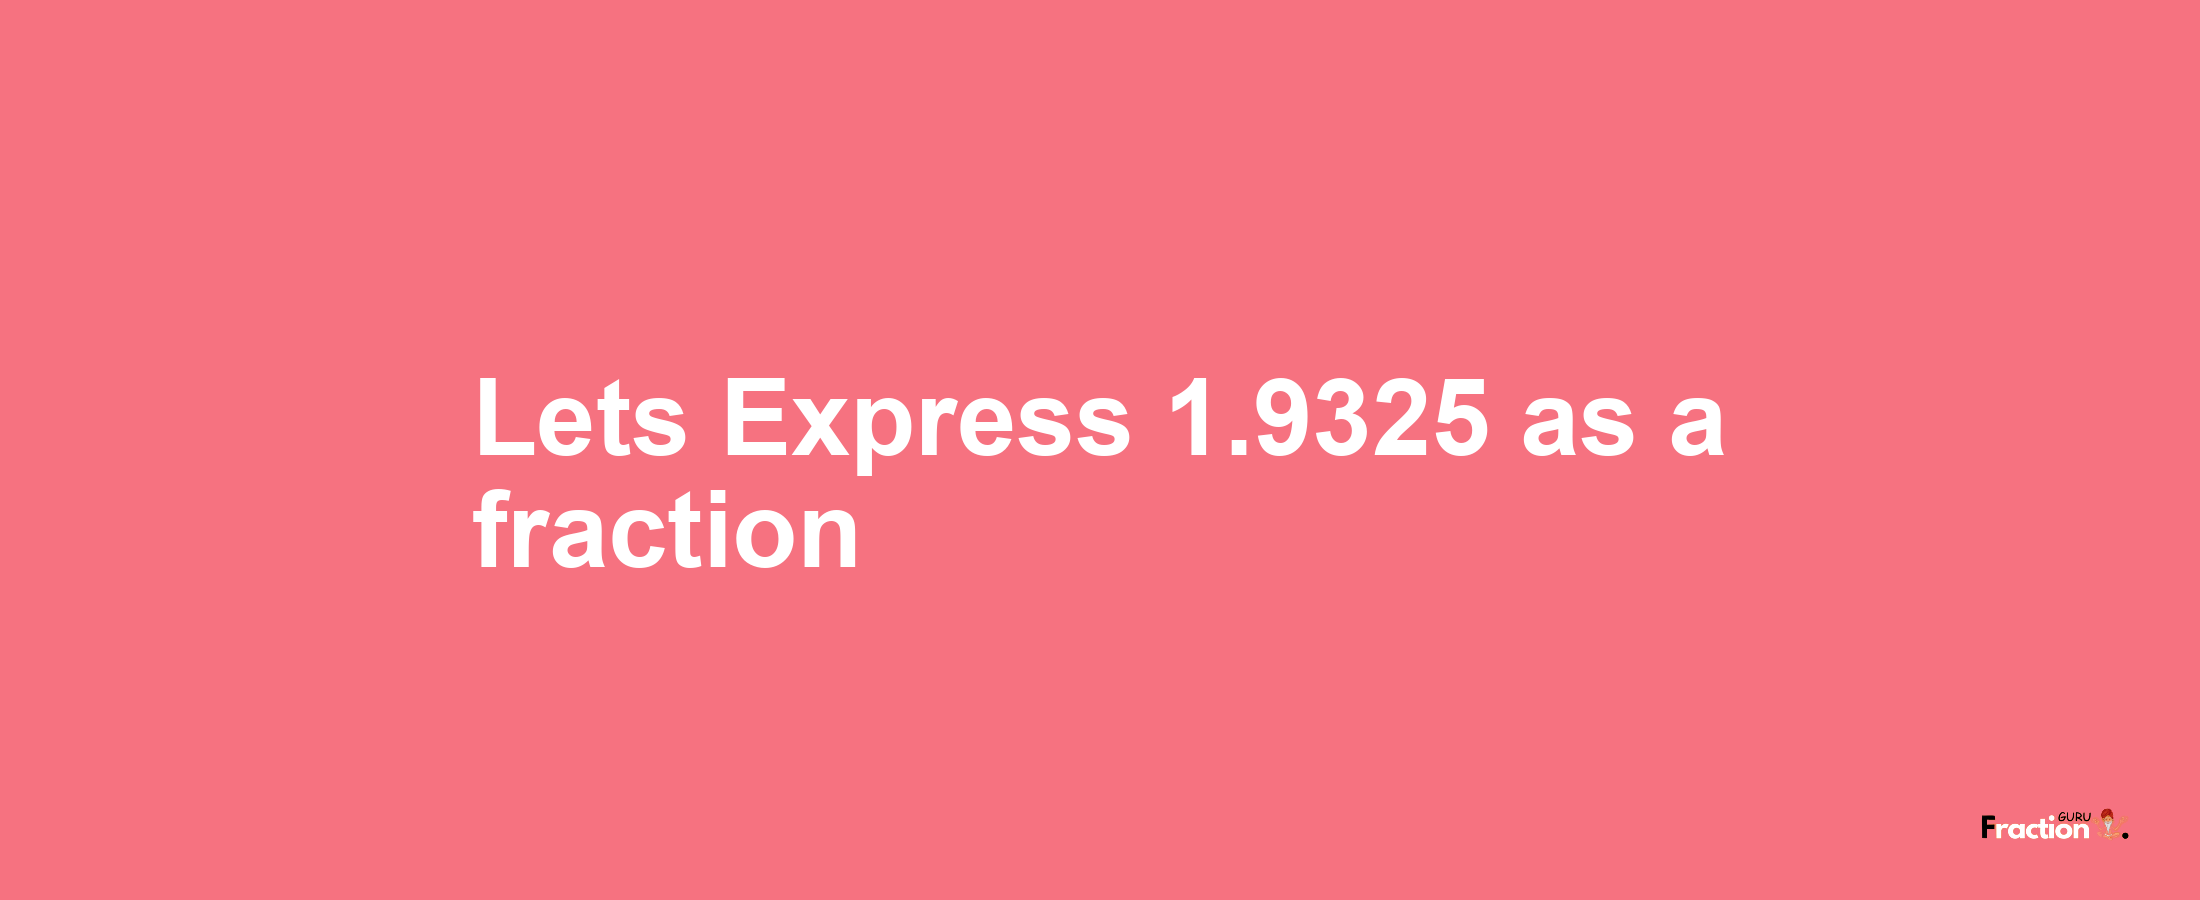 Lets Express 1.9325 as afraction